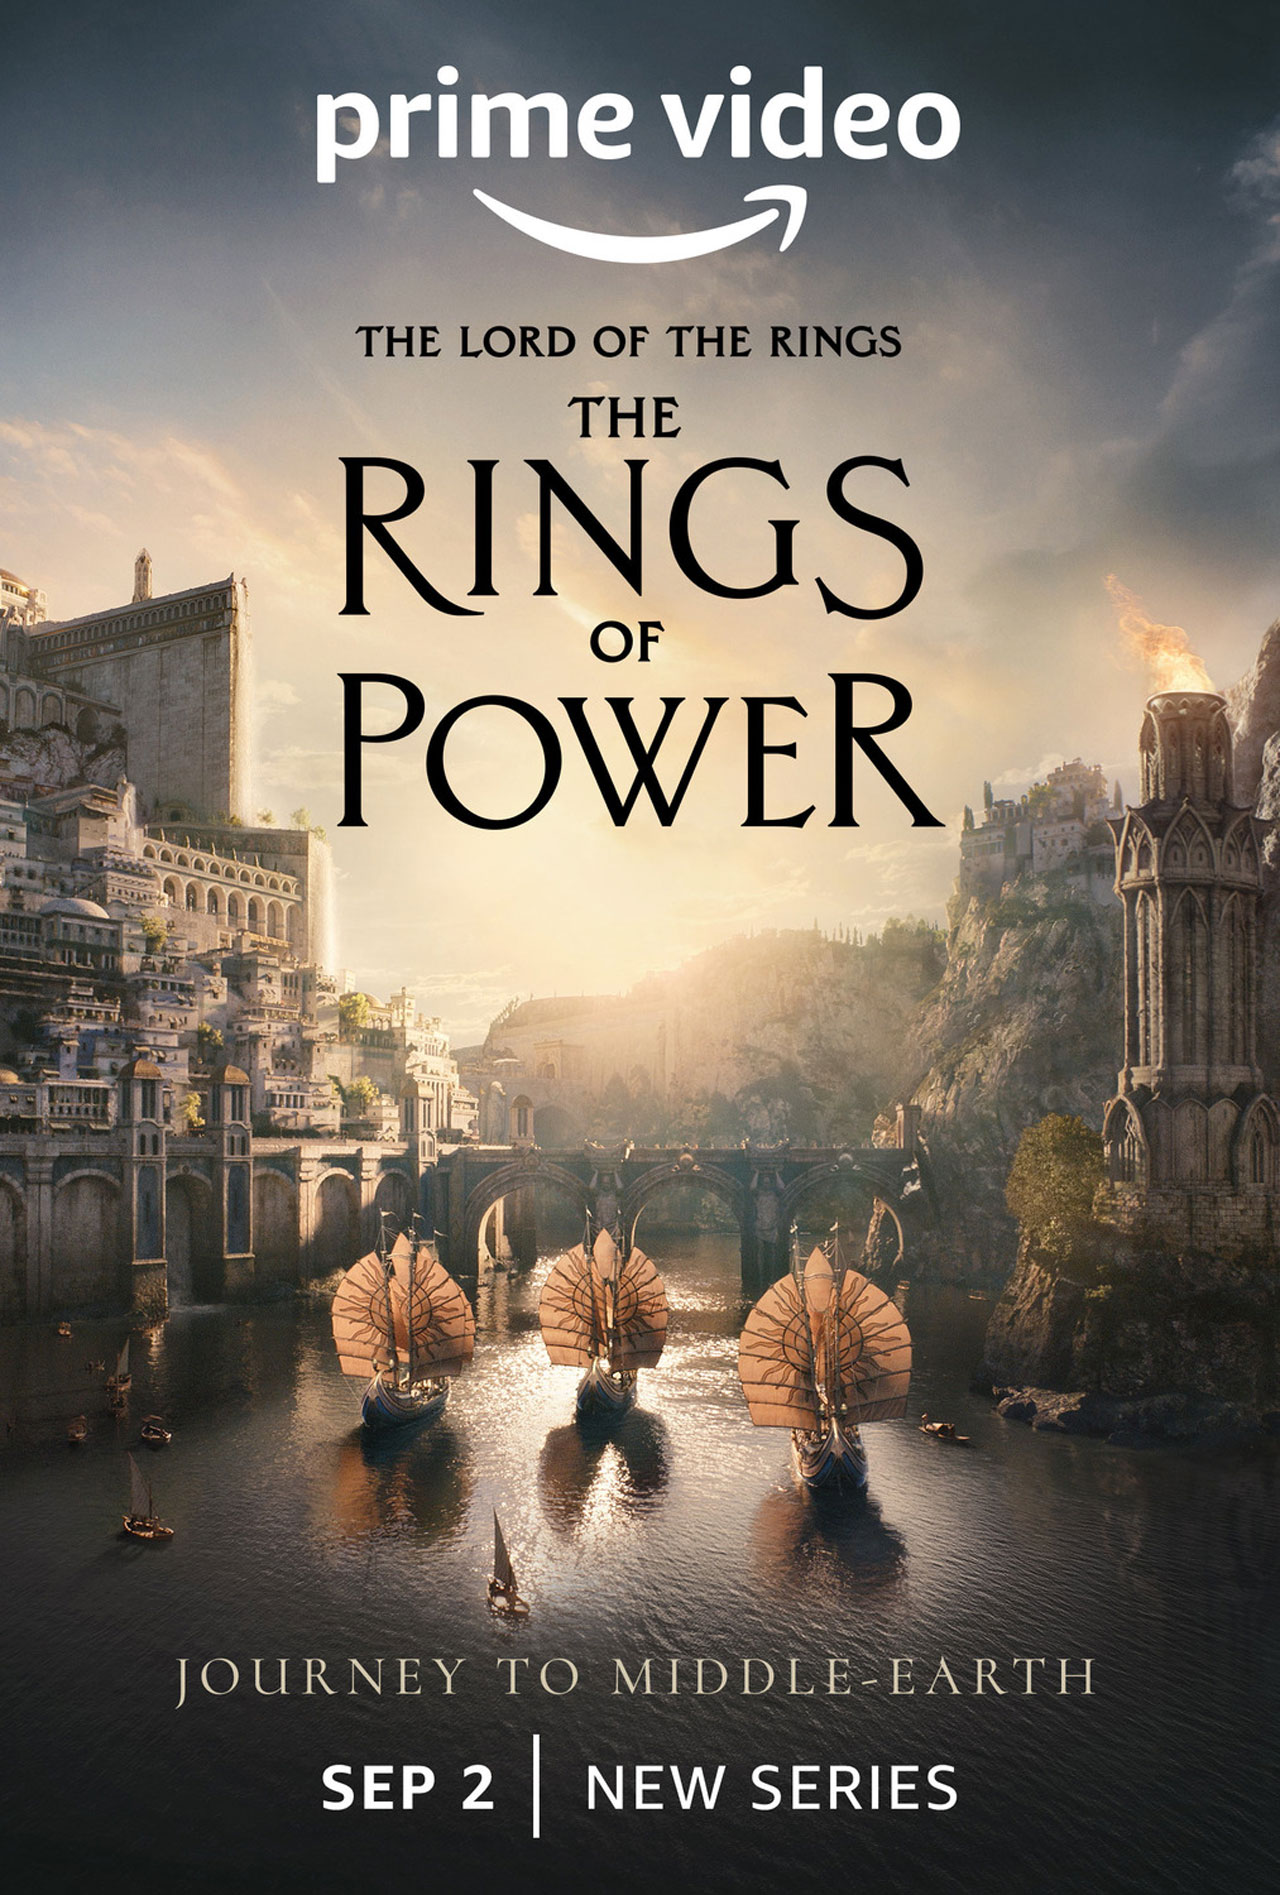 Amazon's Lord Of The Rings Series Officially Titled The Rings Of Power